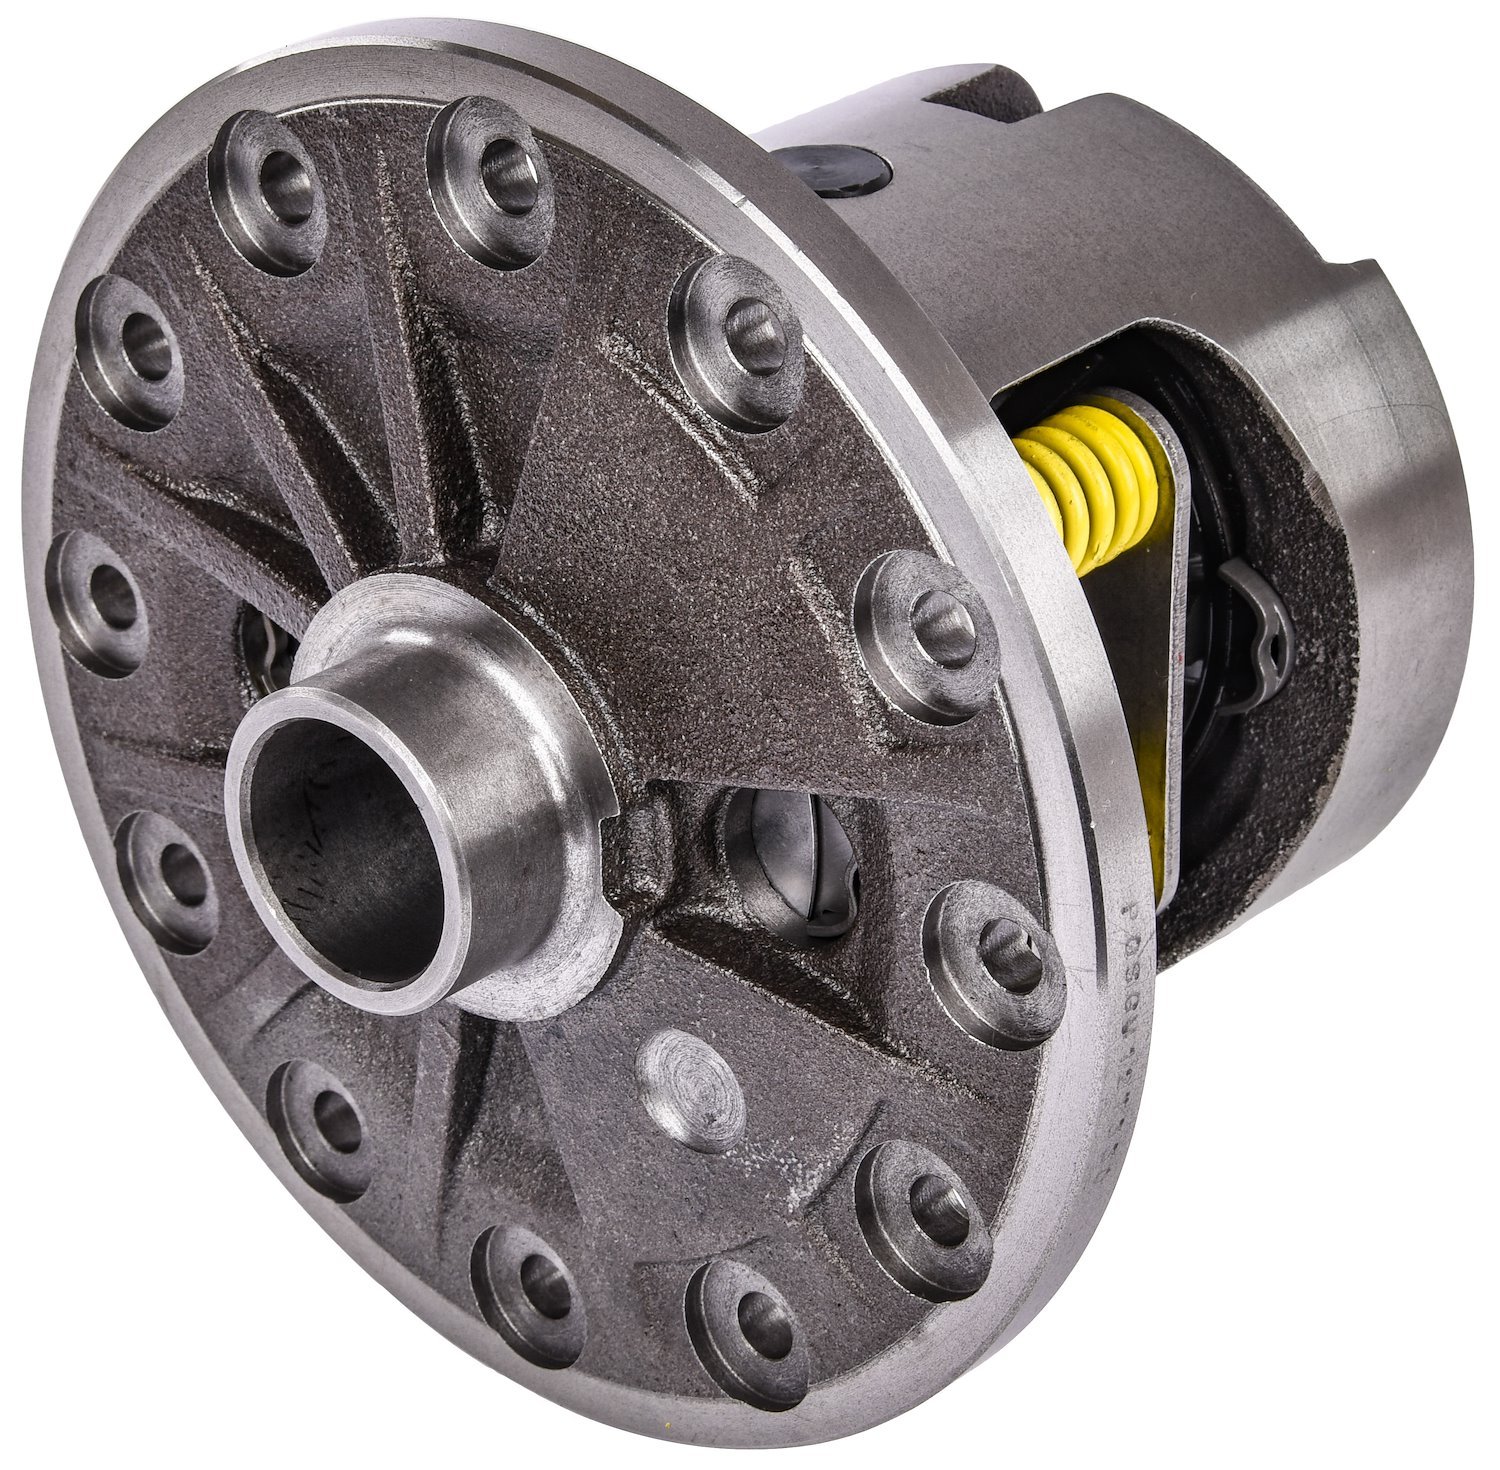 Posi Traction Differential for GM Truck 12-Bolt 8.875" Rear, 30-Spline [2.76-3.42 Ratio]